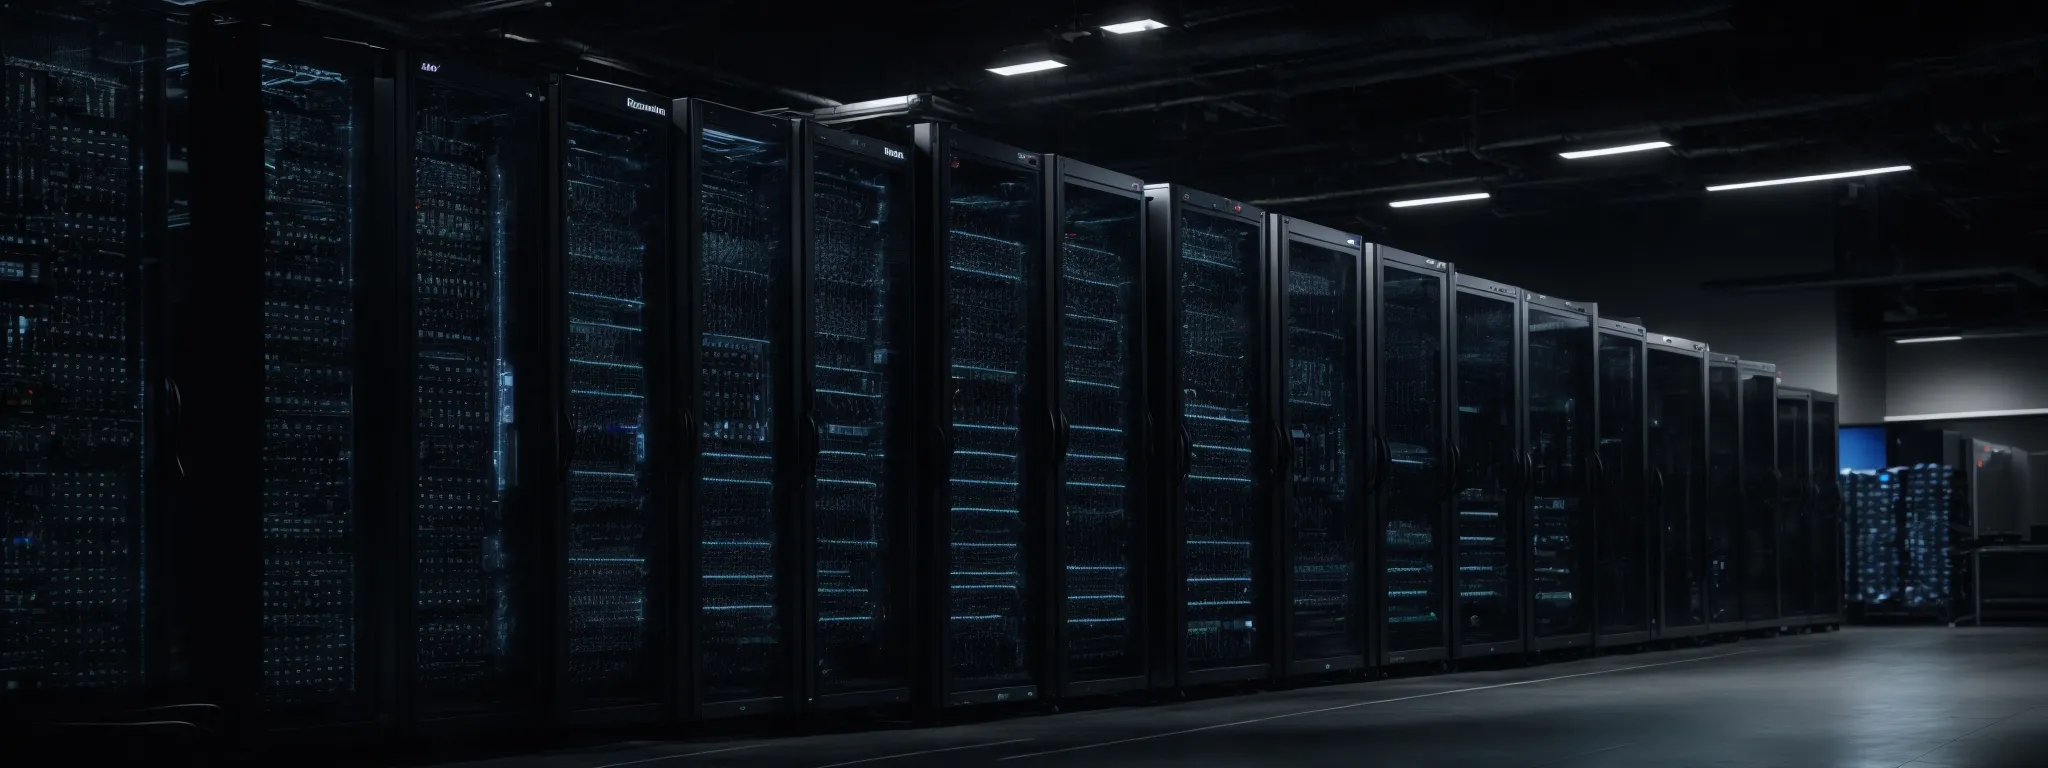 a server rack humming in a cool, dark data center highlighting the modern infrastructure that powers innovative seo technologies like indexnow.